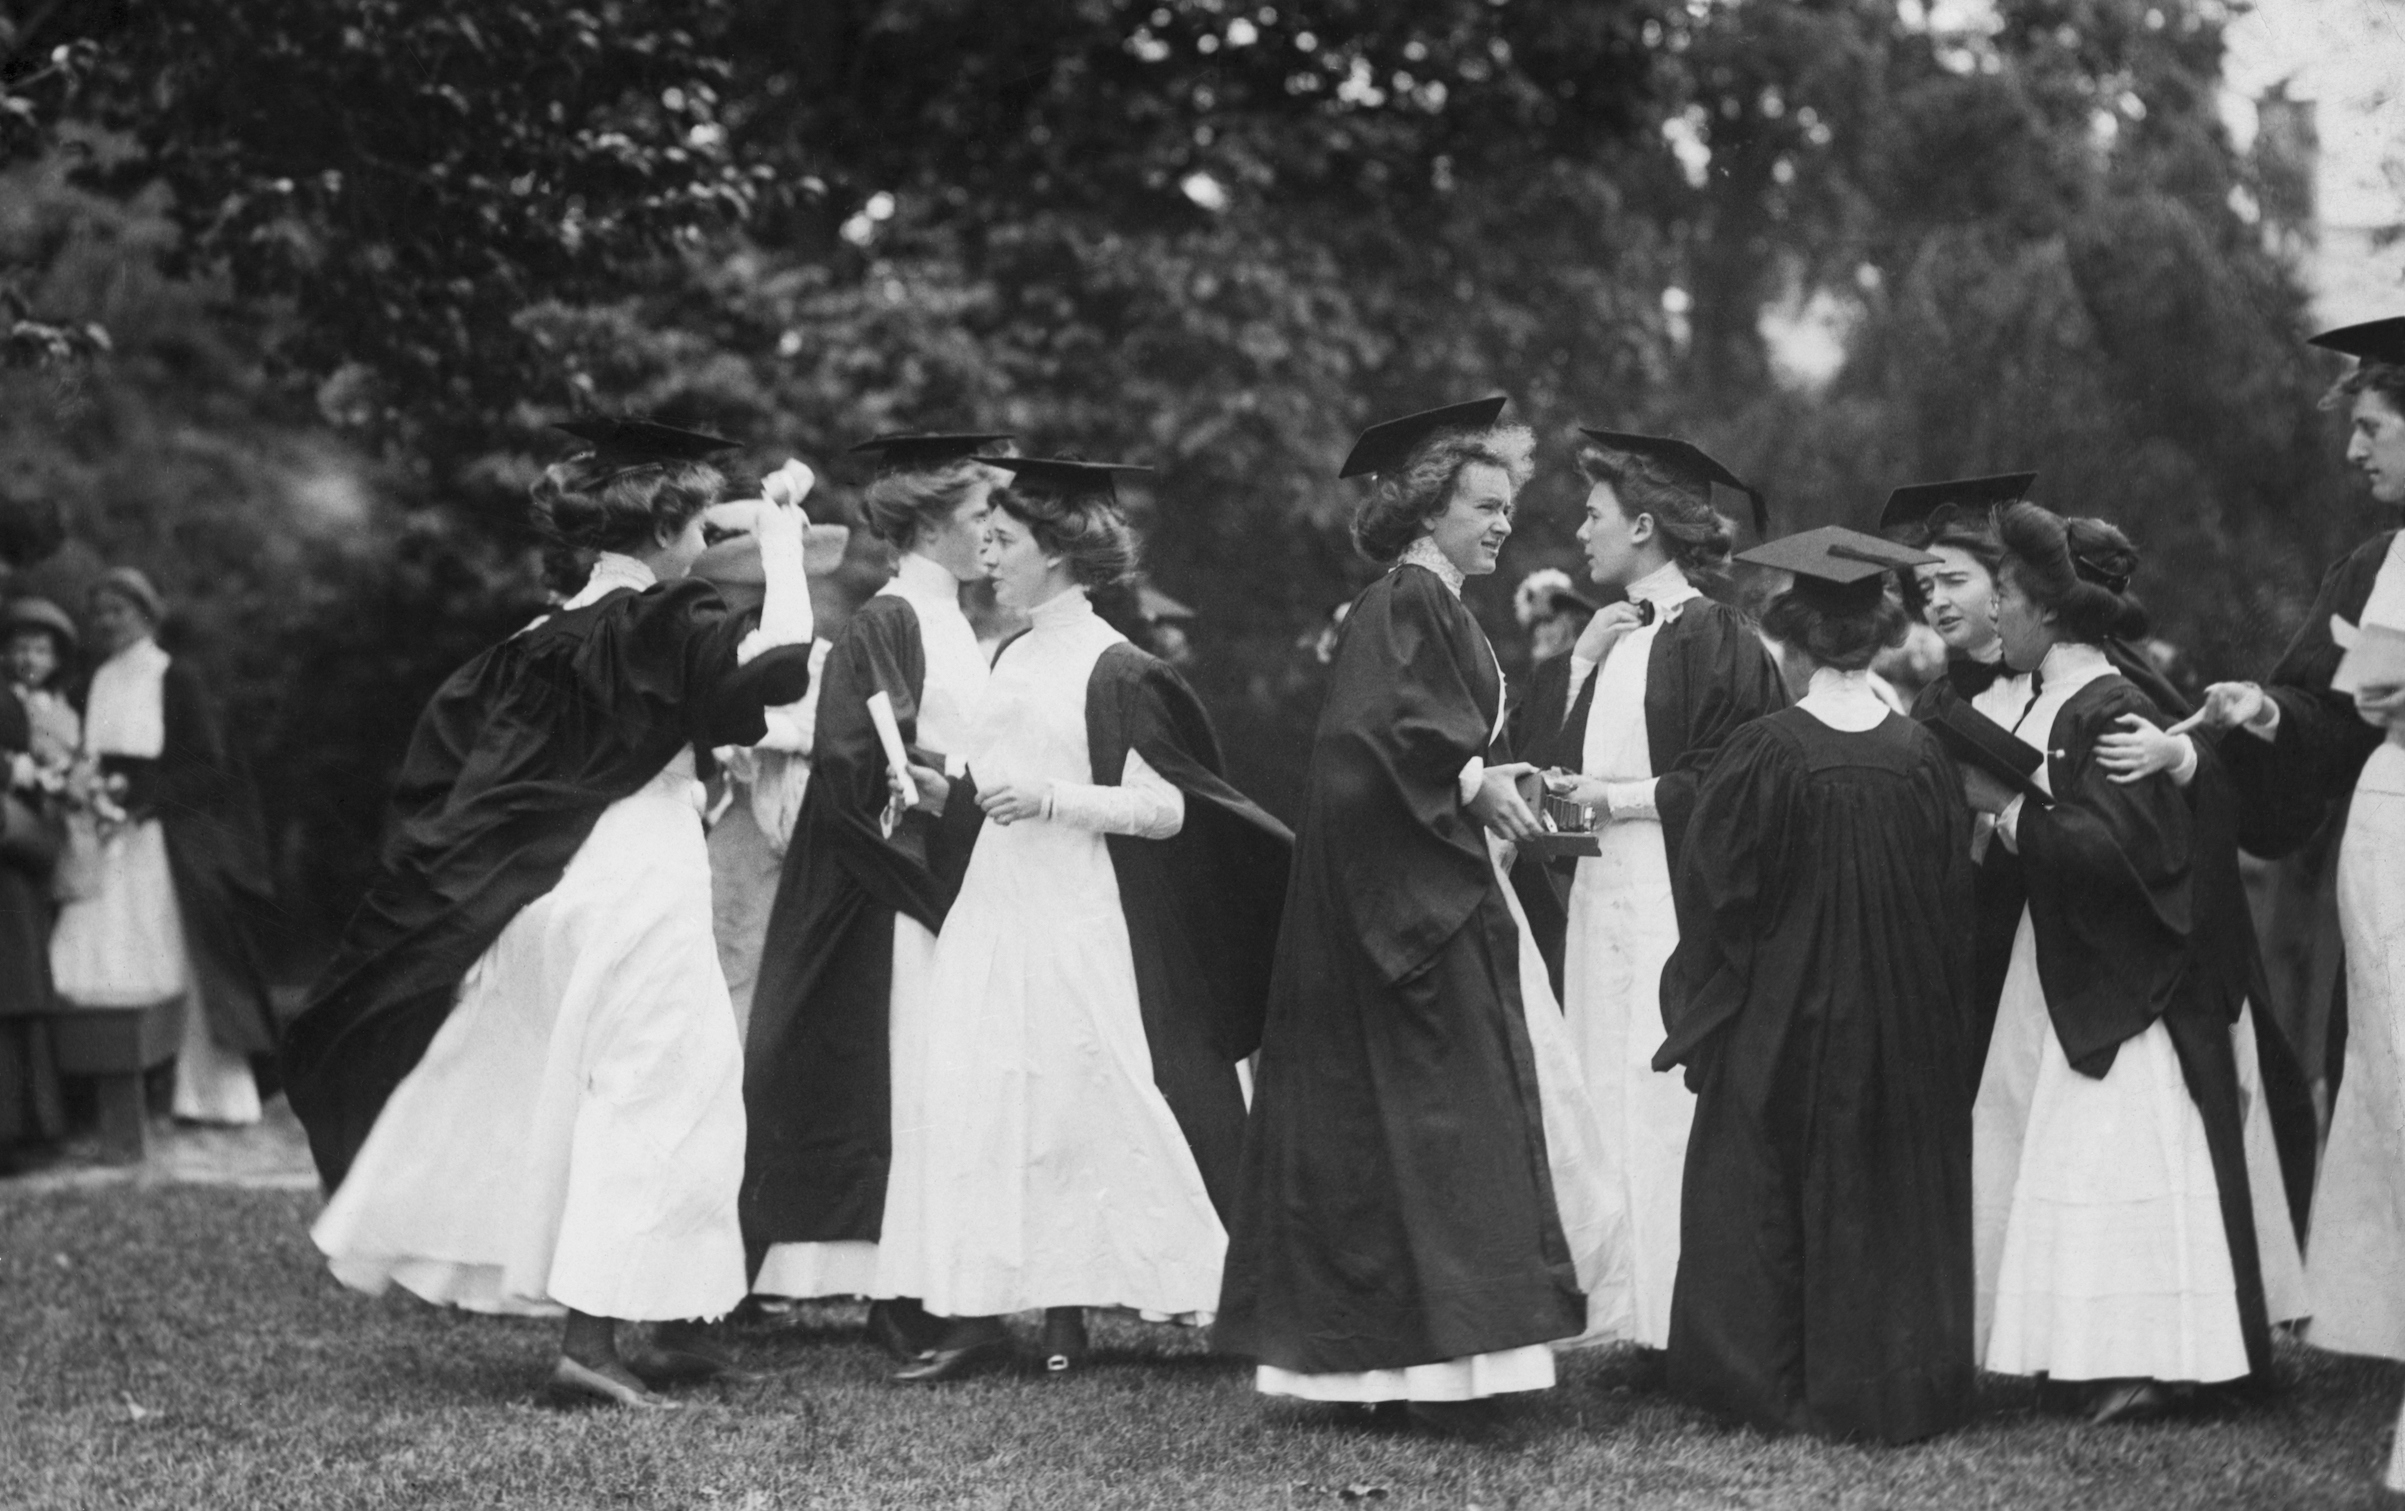 Women Graduates Exiting After Ceremony